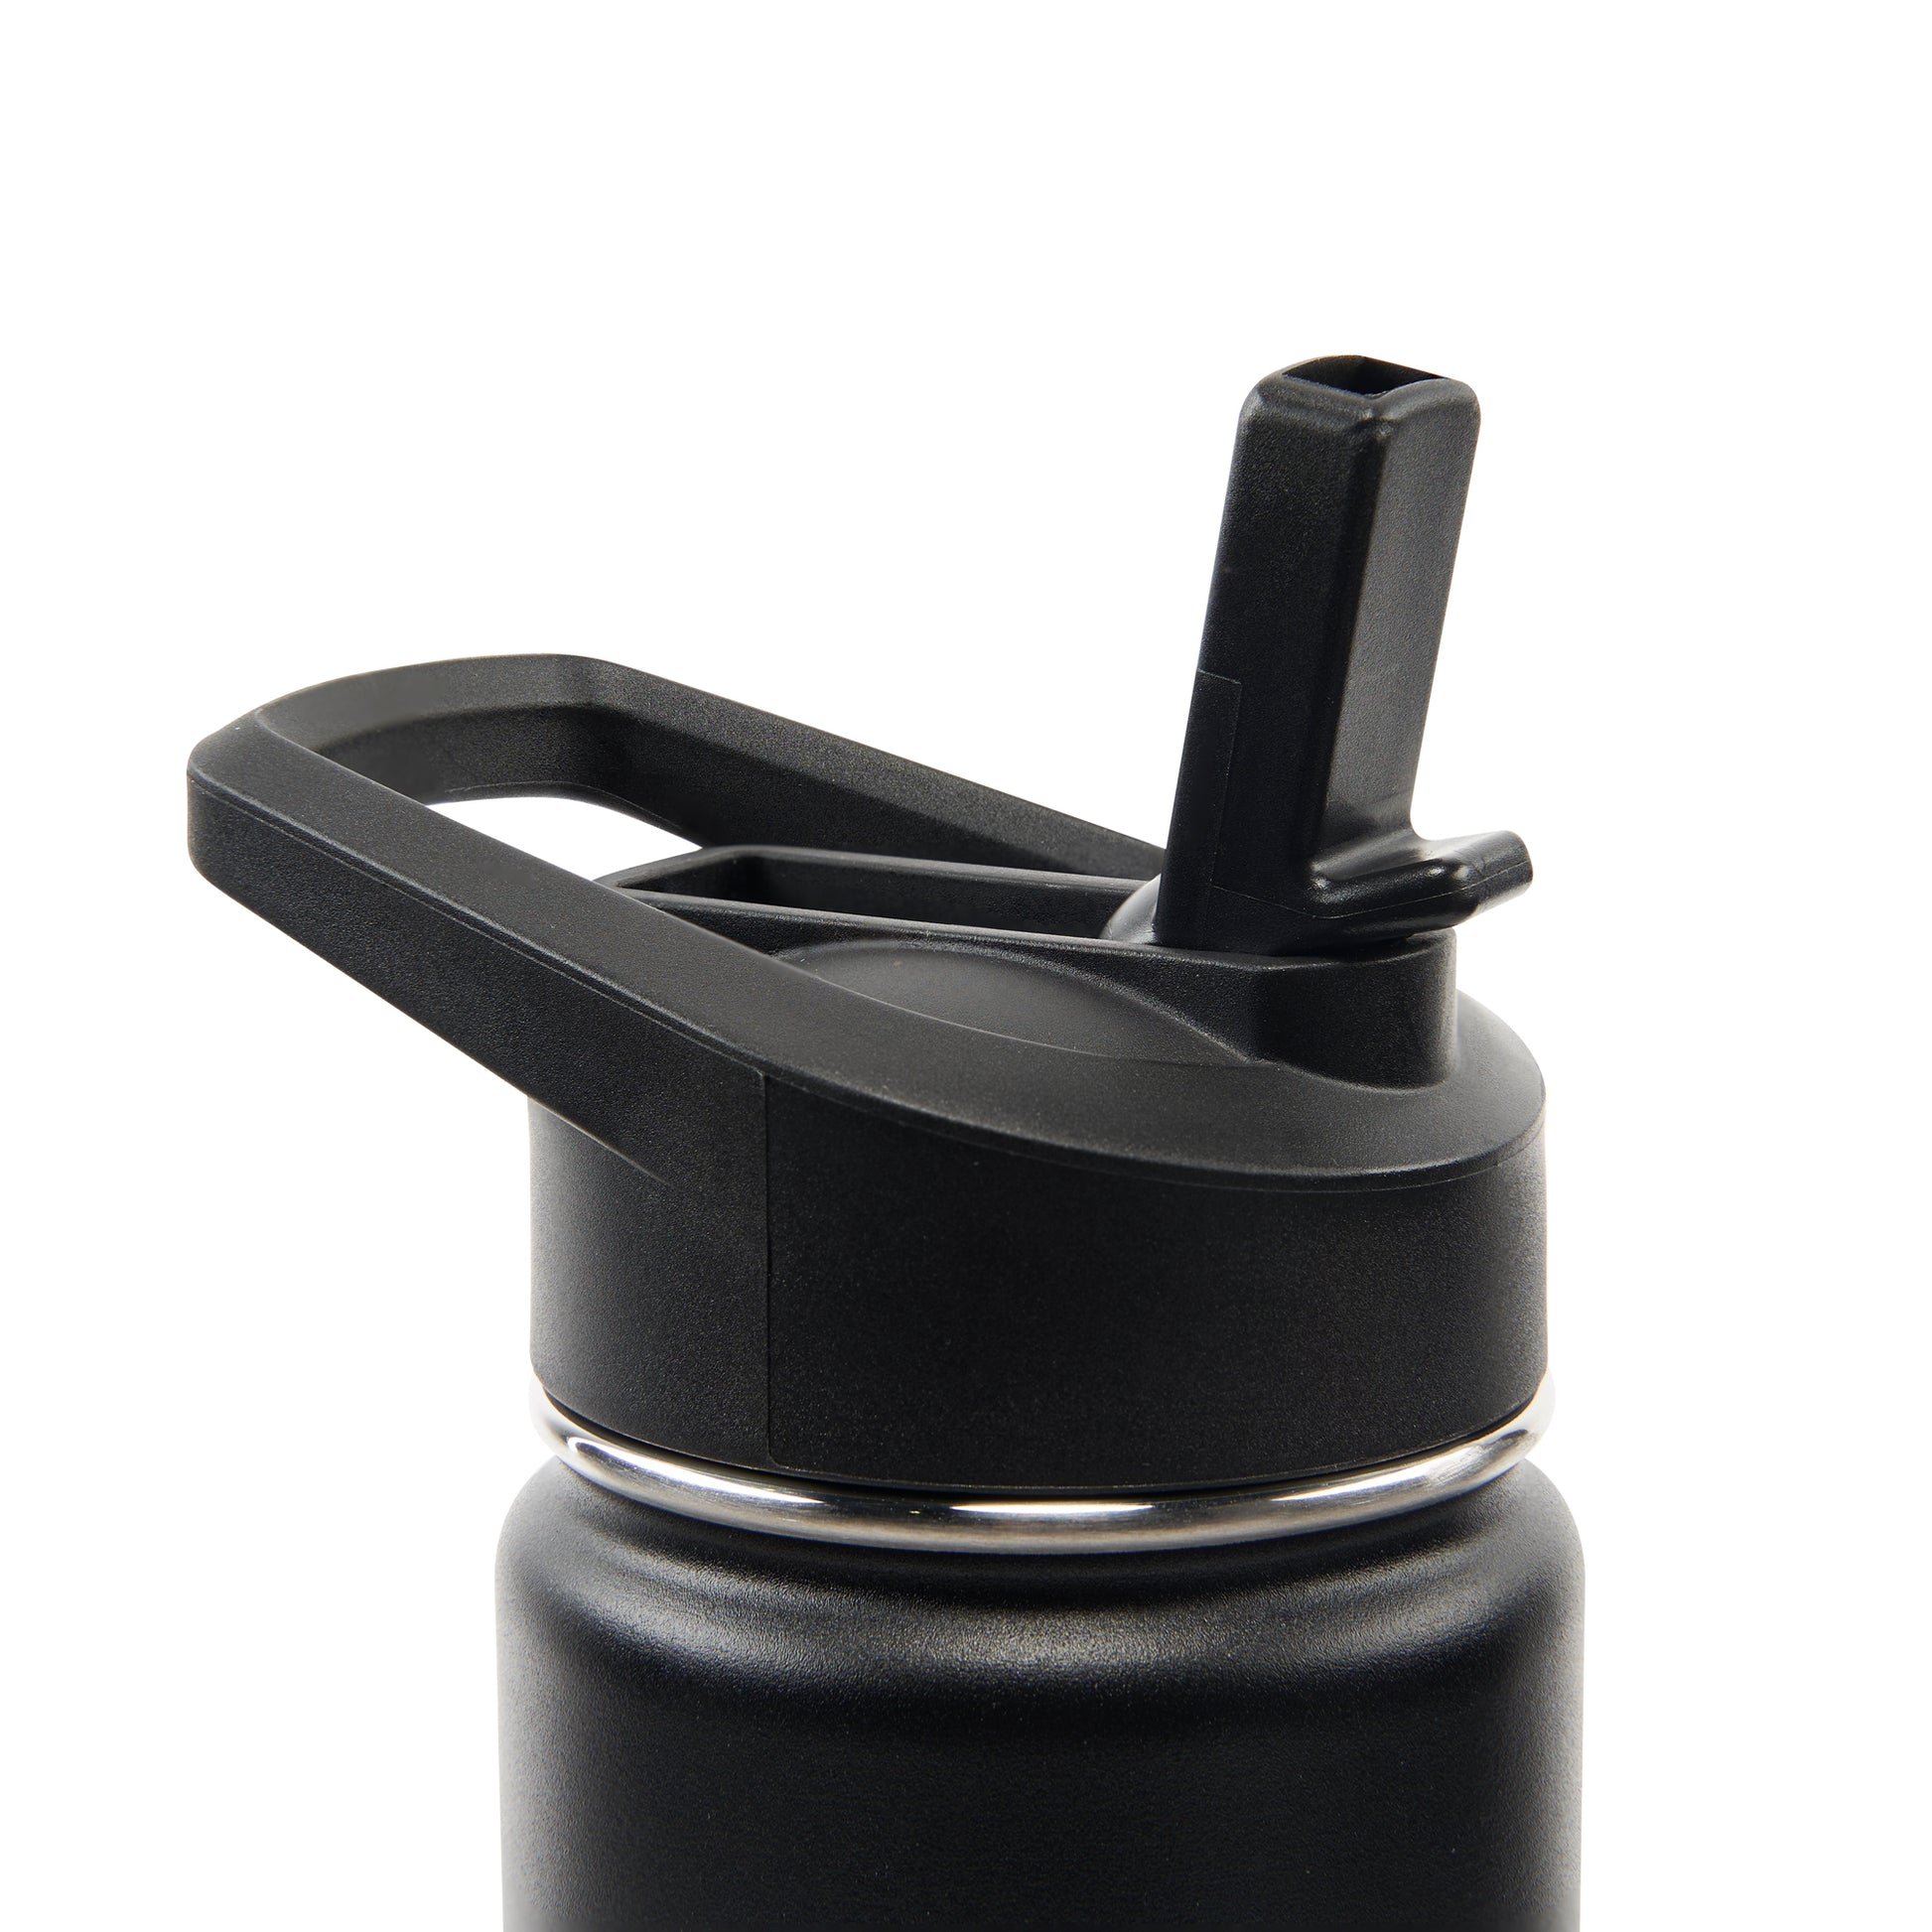 A close-up shot of the black Ooze water bottle's lid shows the flip cap mouthepiece open.